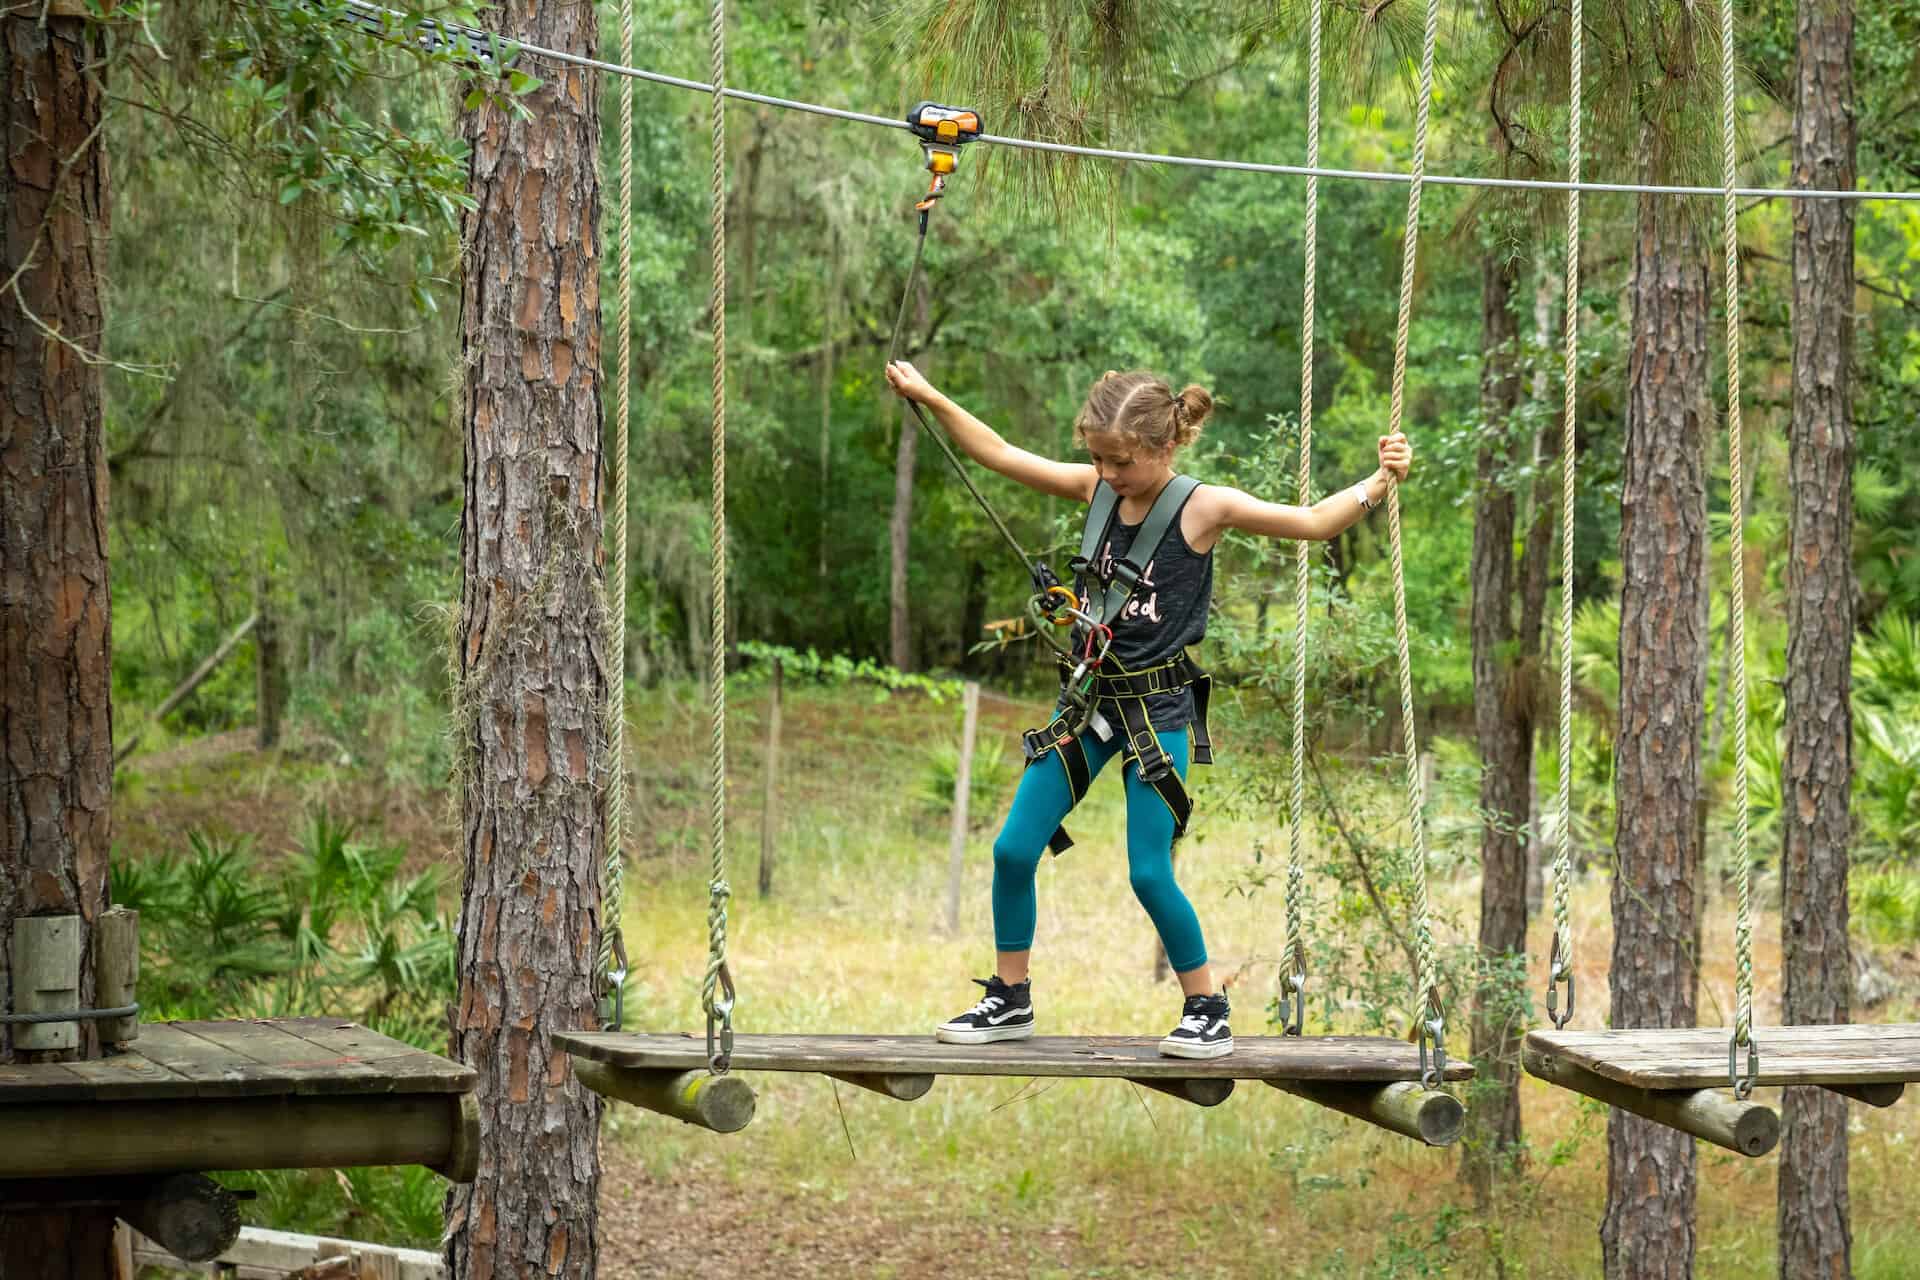 TreeUmph Where to Go zip lining in Tampa Bay